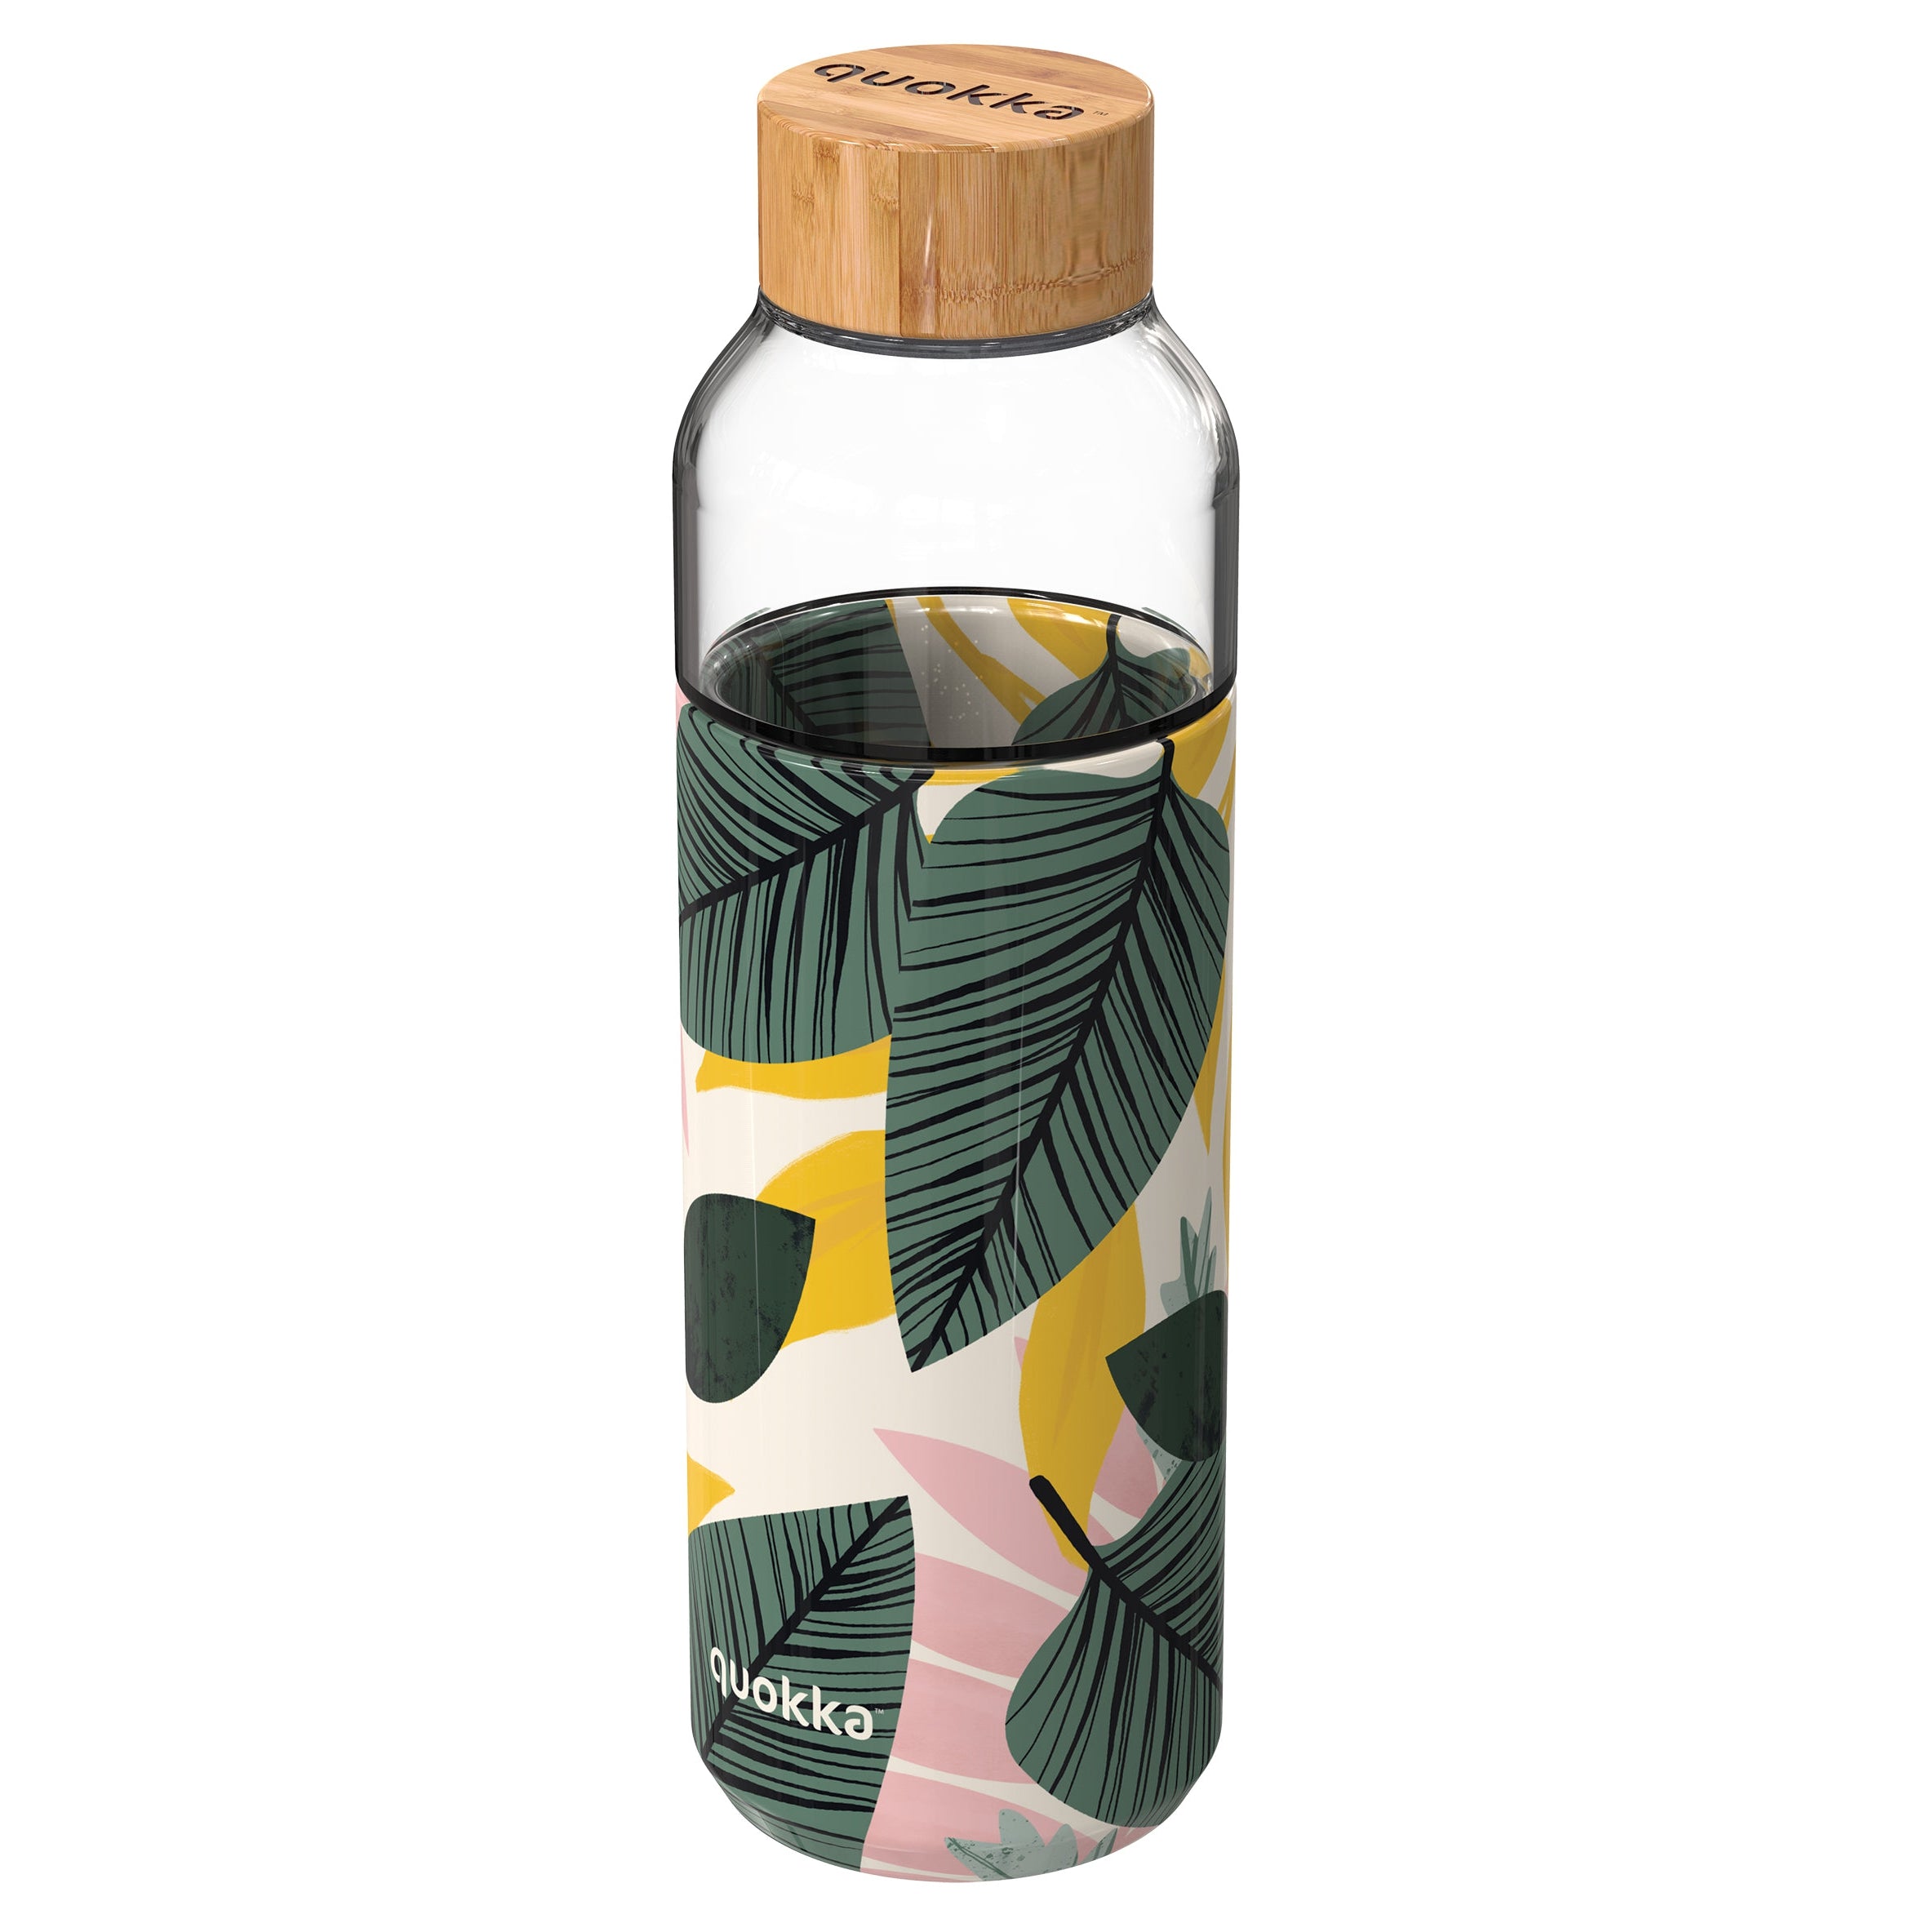 QUOKKA GLASS BOTTLE WITH SILICONE COVER FLOW 660 ML AUTUMN LEAVES